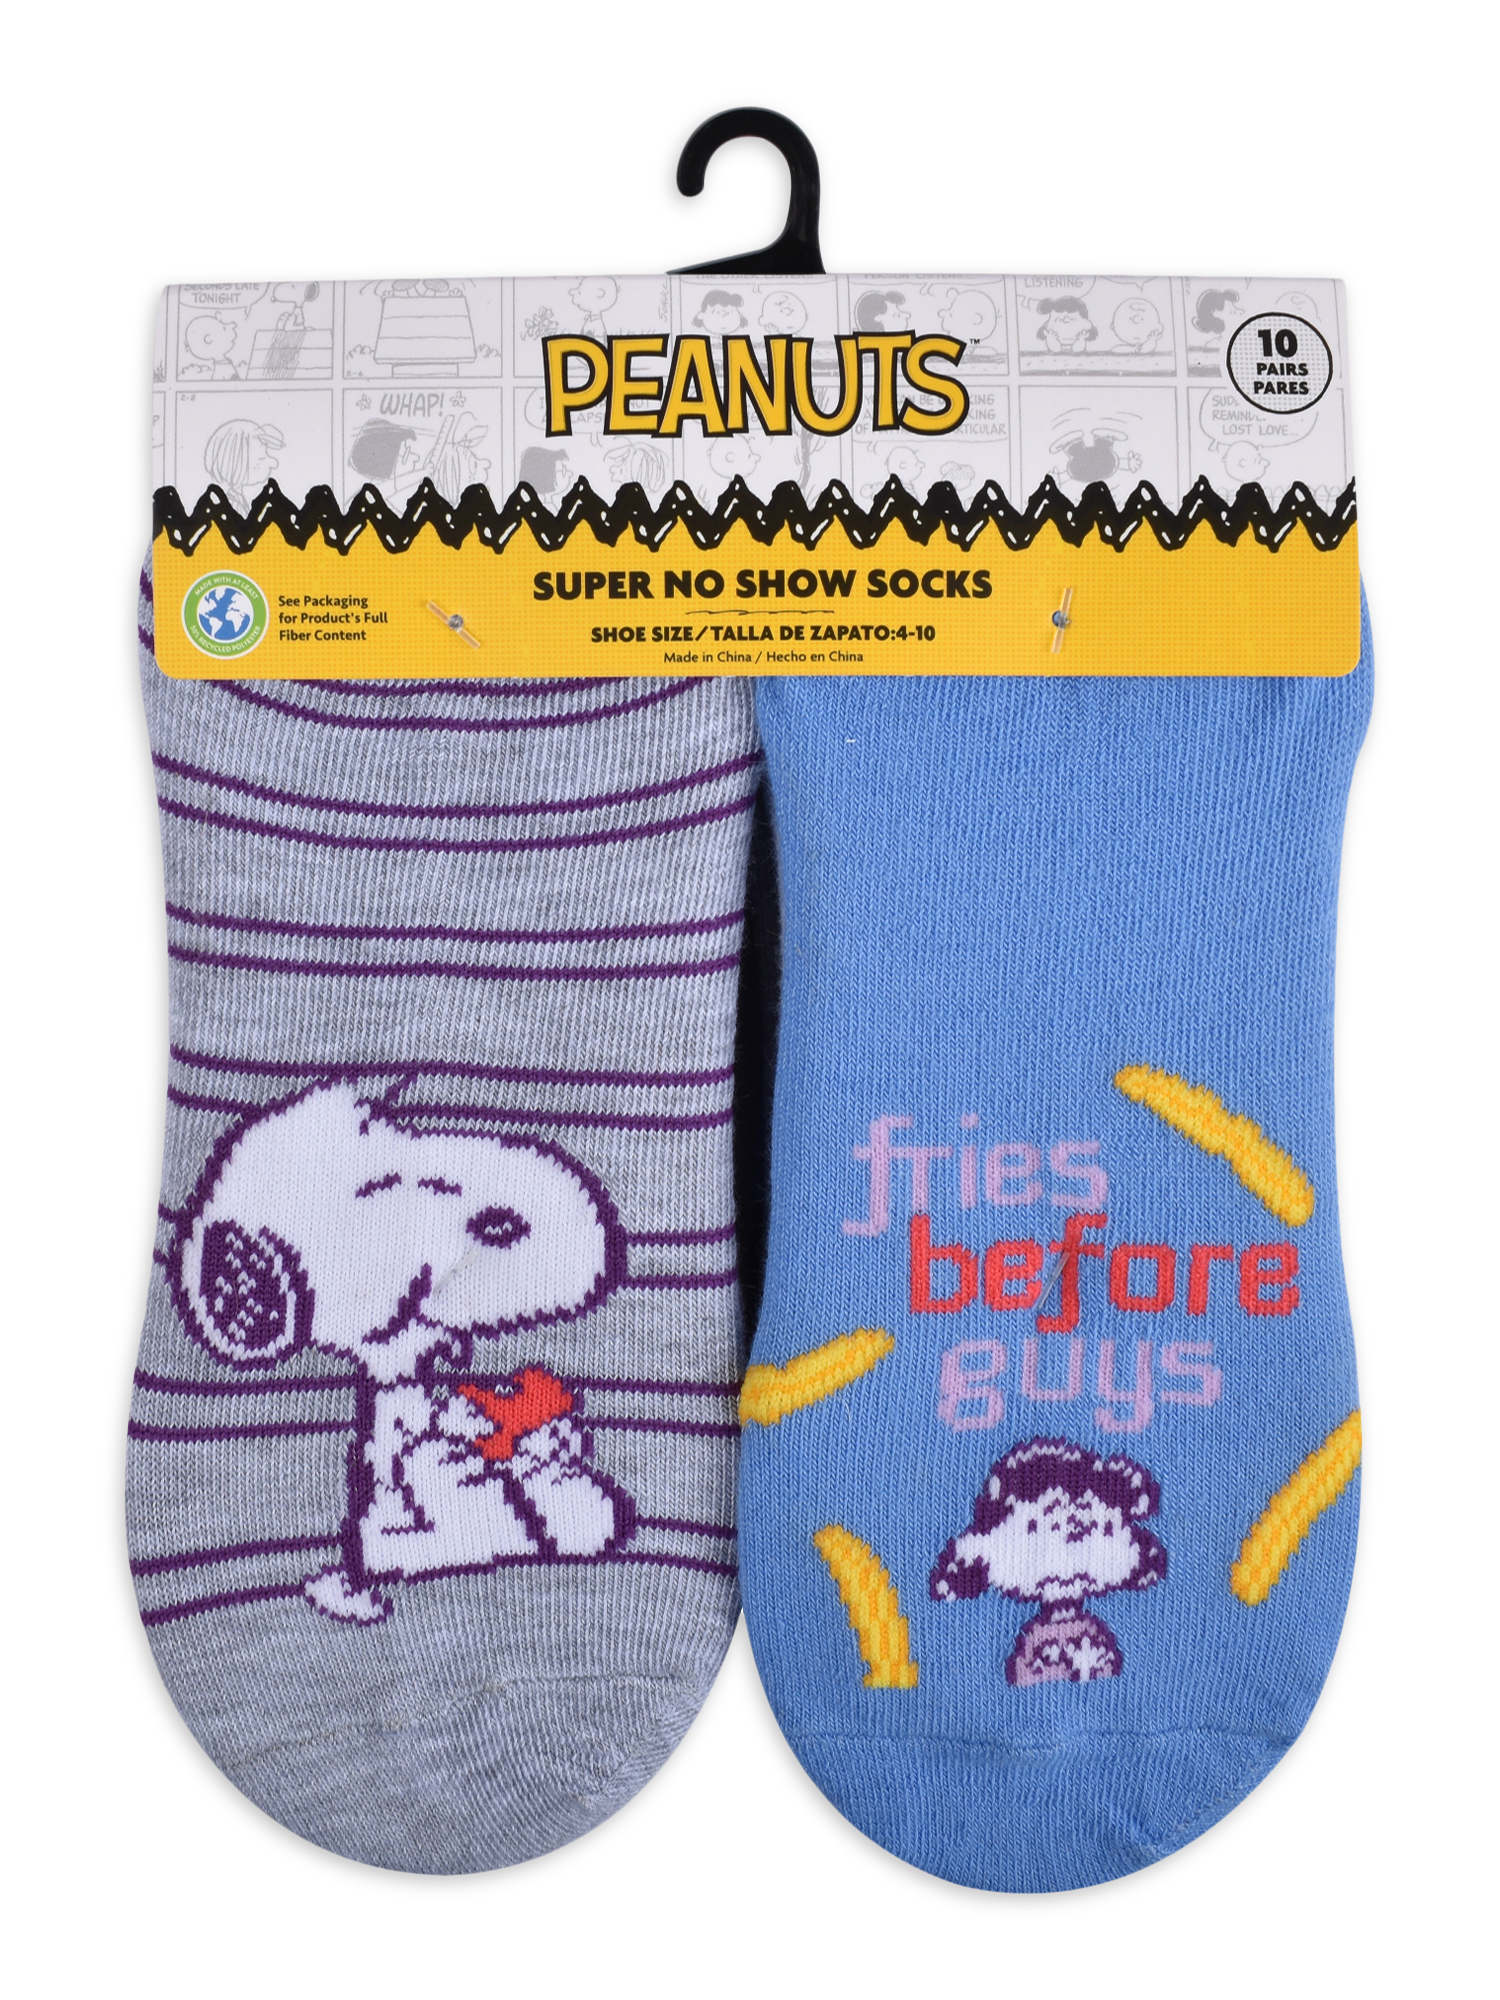 Peanuts Womens Graphic Super No Show Socks, 10-Pack, Sizes 4-10 - image 2 of 5